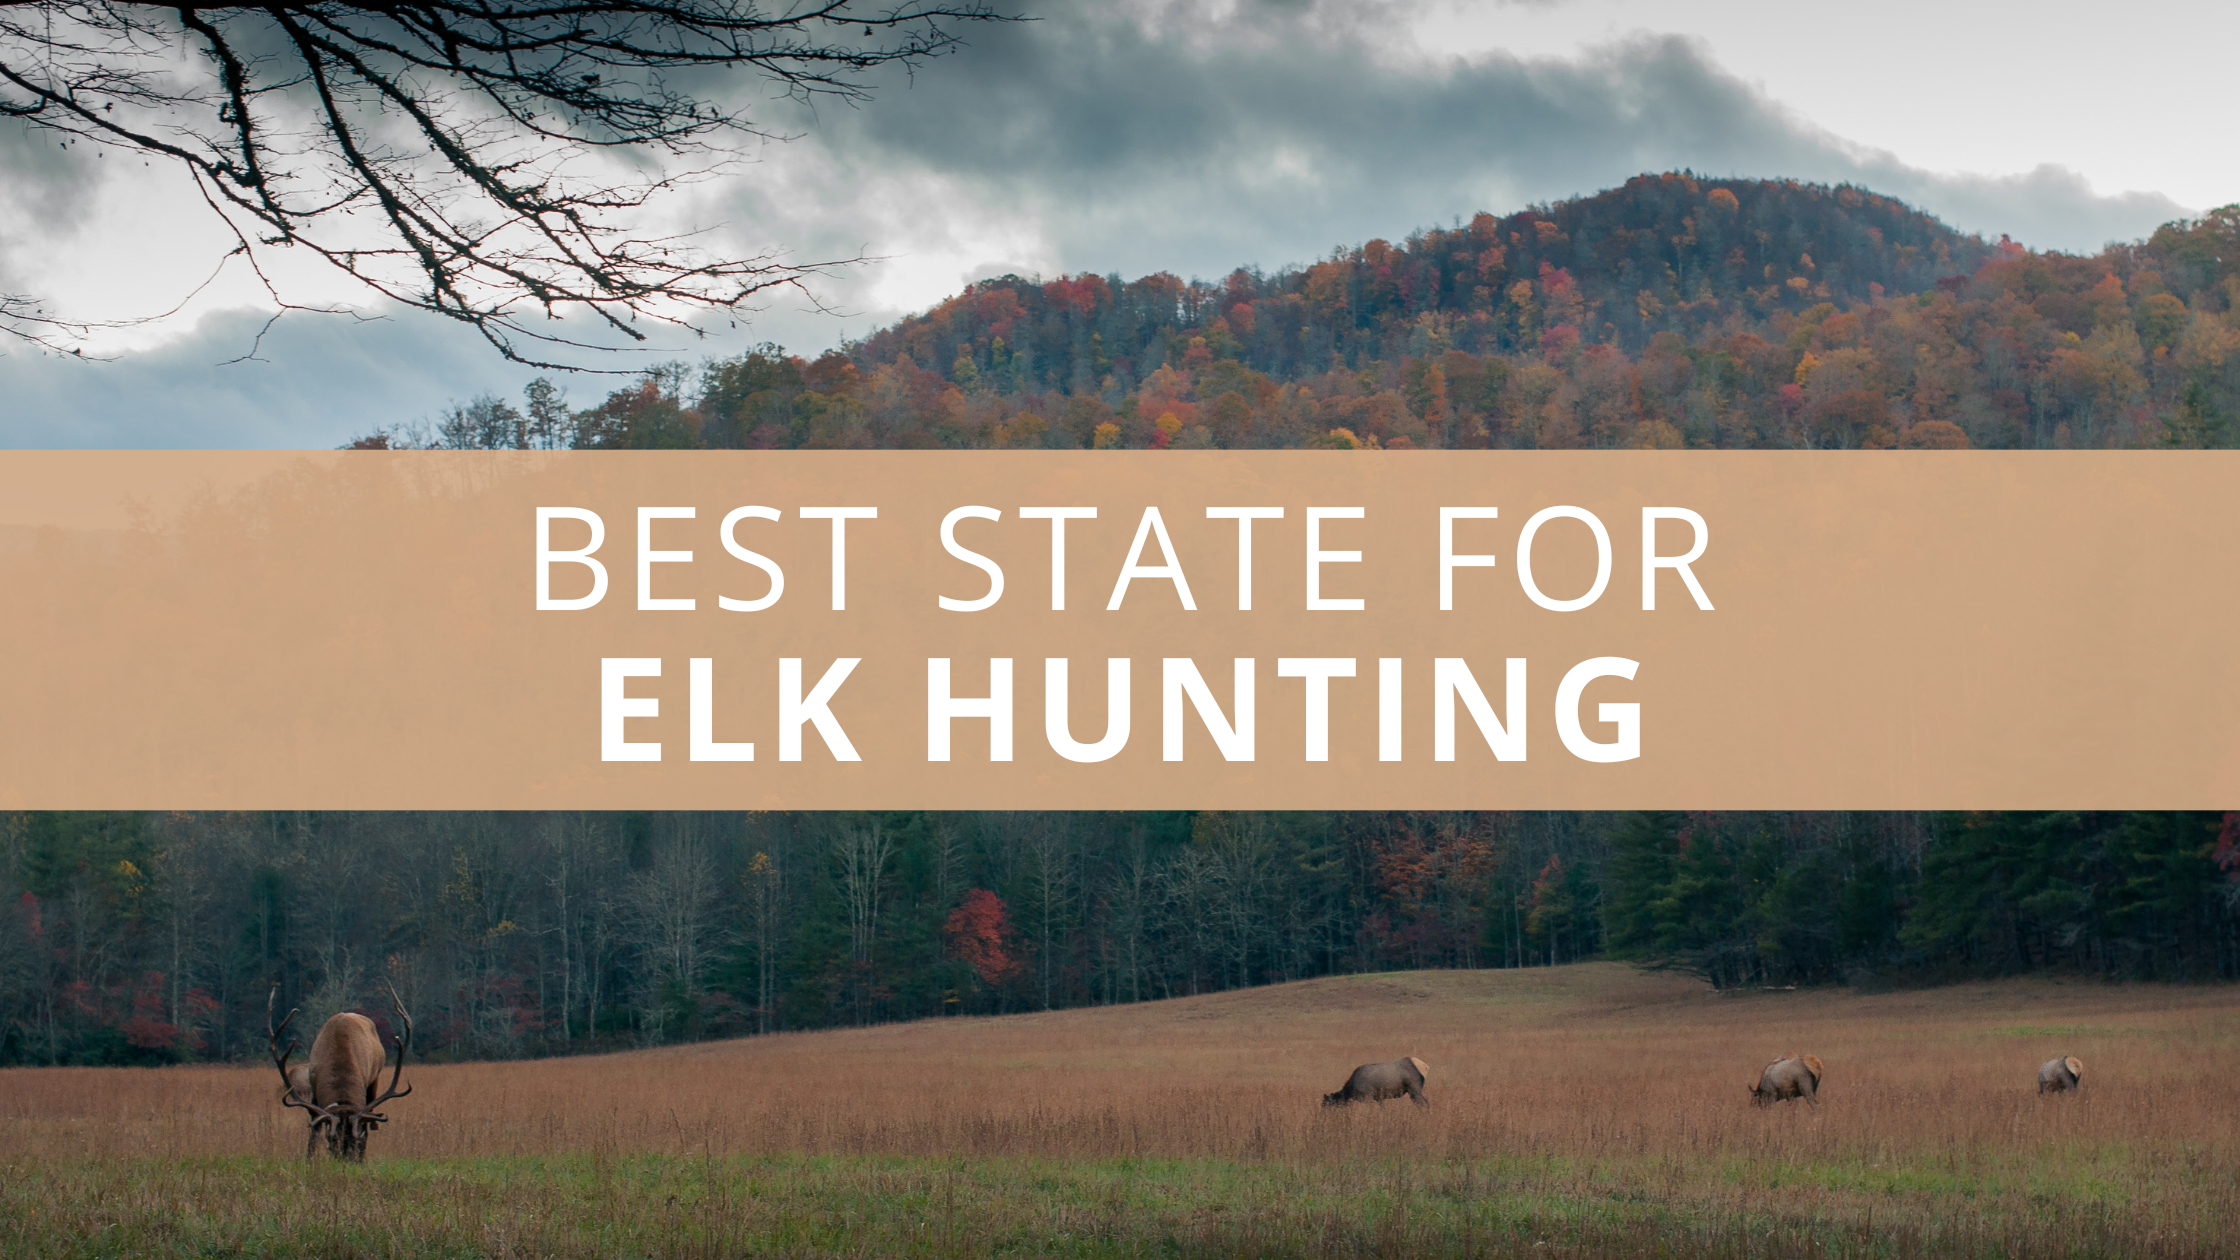 What Is the Best State for Elk Hunting?